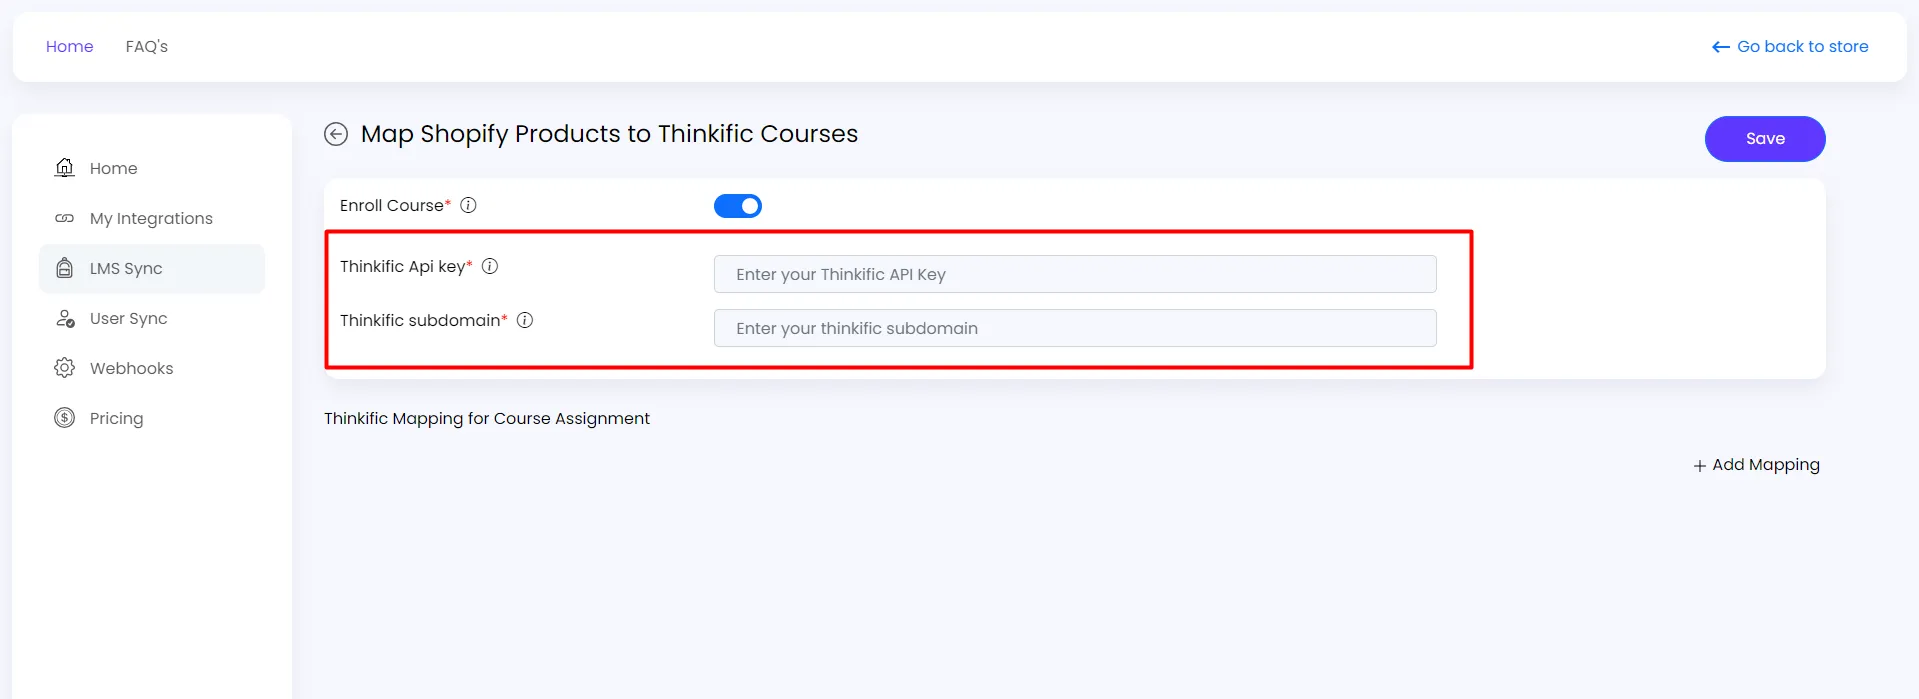 Shopify Thinkific Integration Guide - Thinkific Key and Subdomain